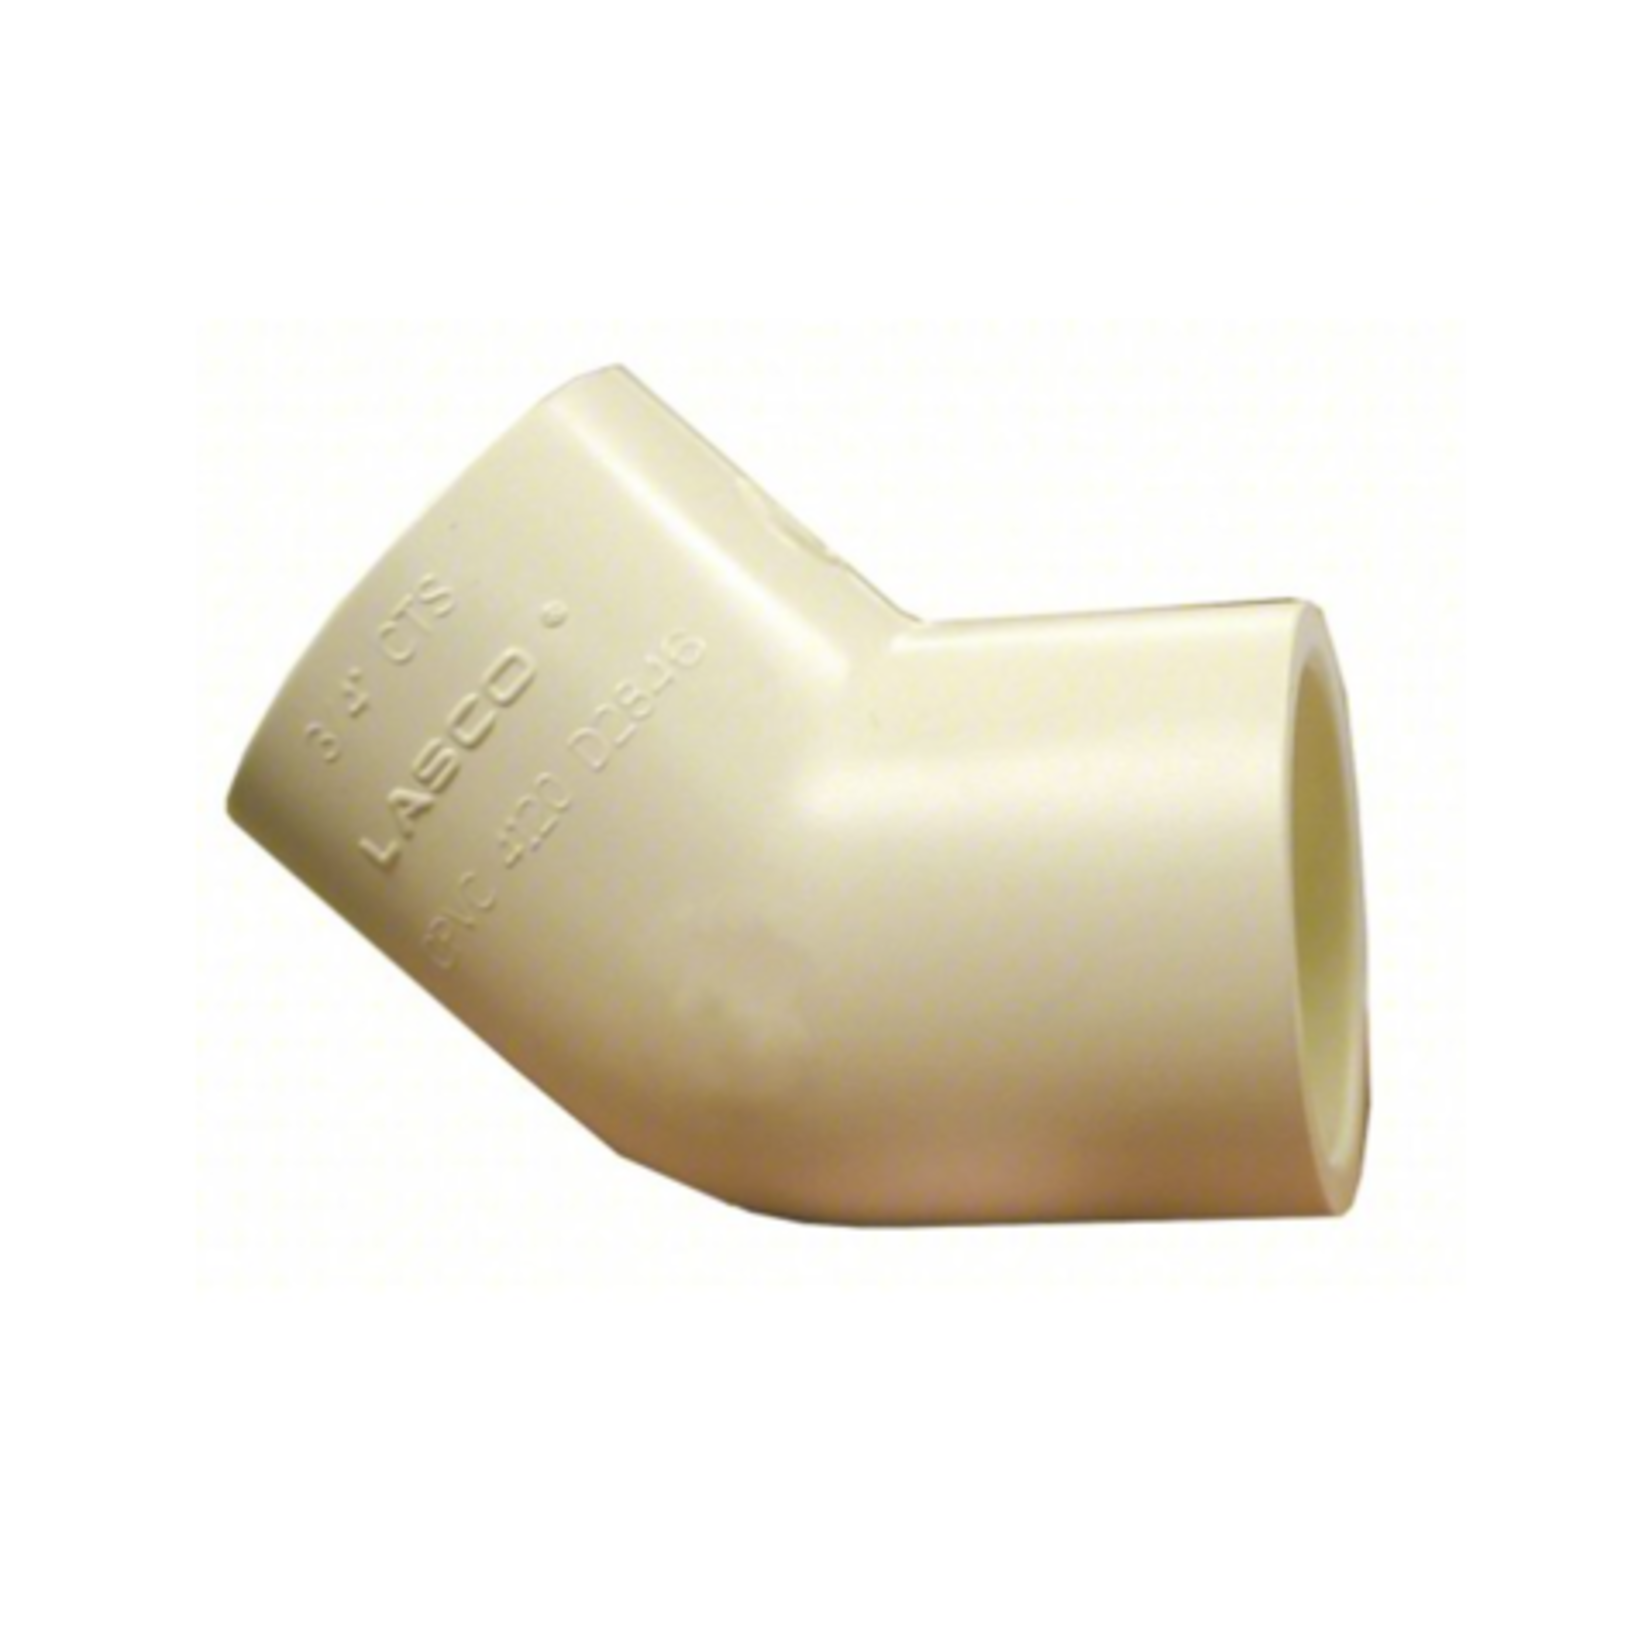 NIBCO 1 1/2 IN CPVC SCHEDULE 40 45 DEGREE ELBOW